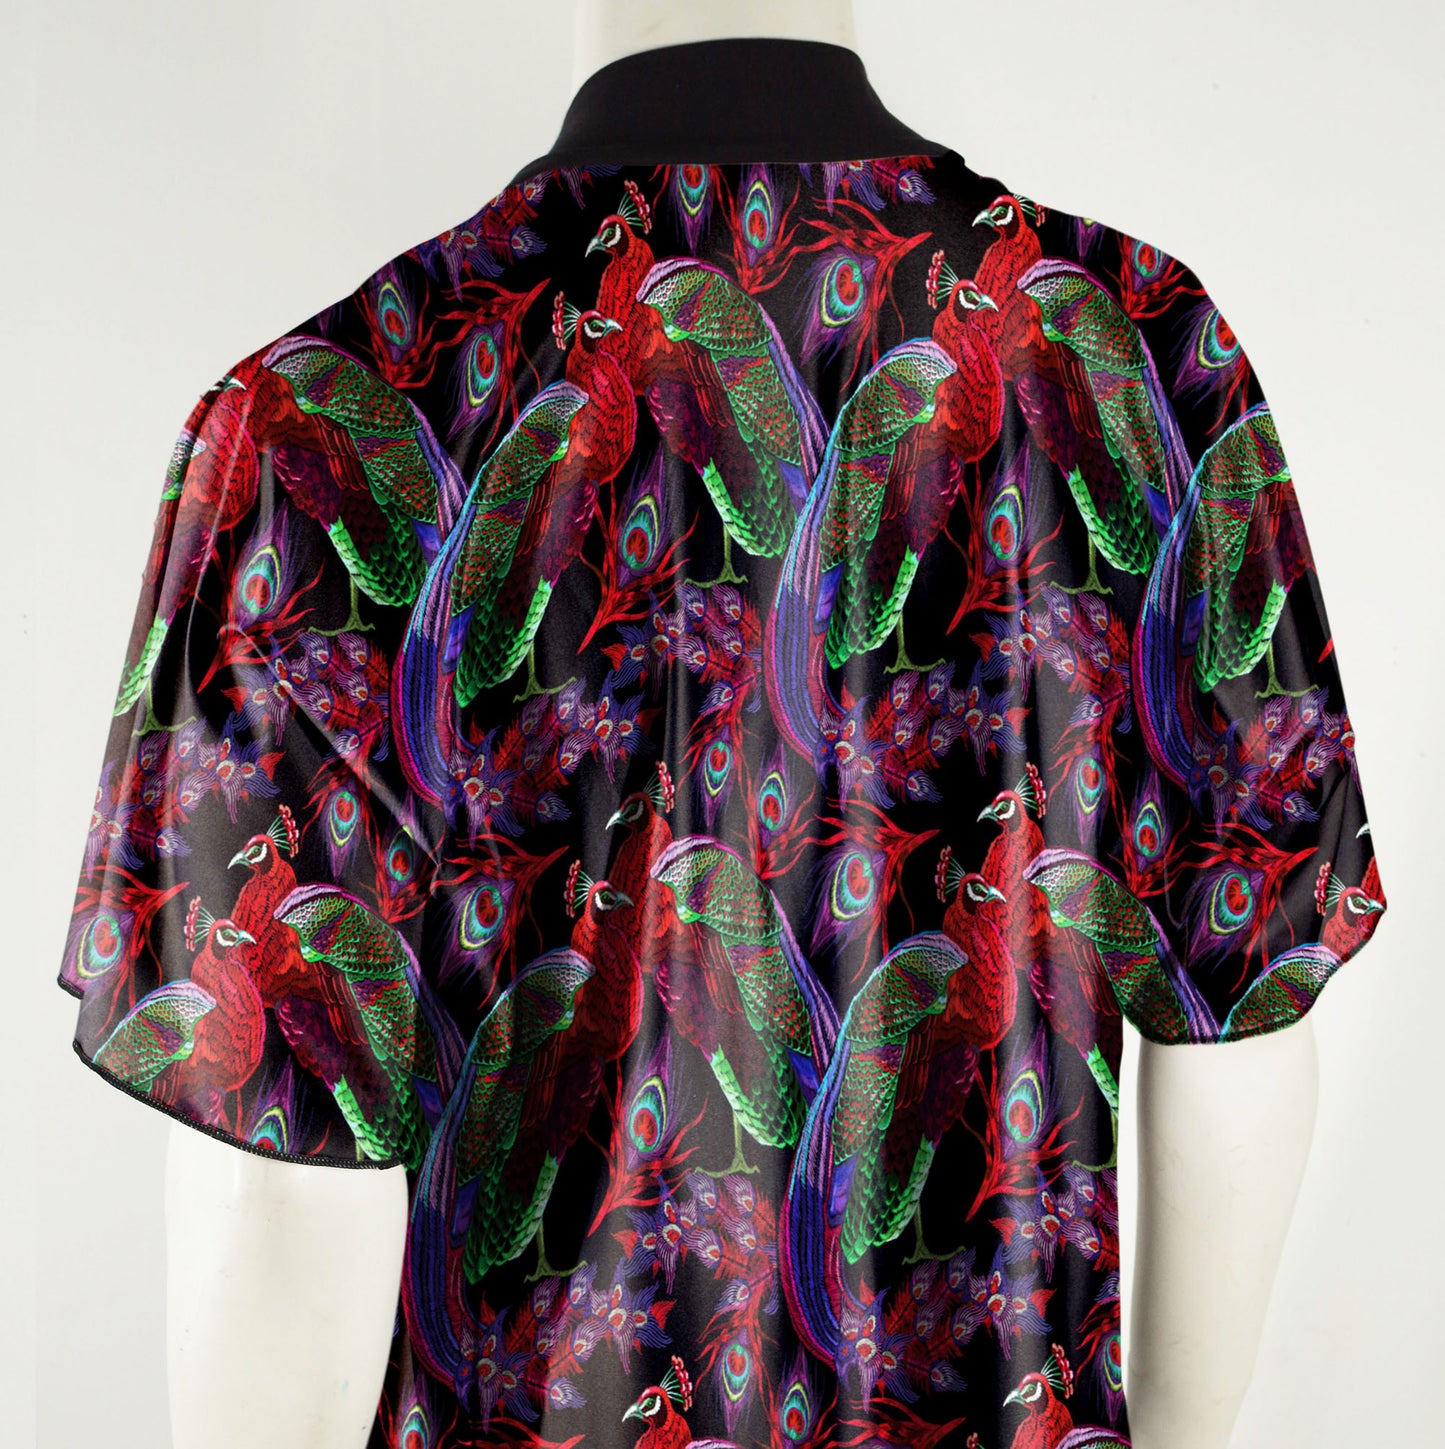 Festival Kimono Mens or Womens with Red Peacock Print